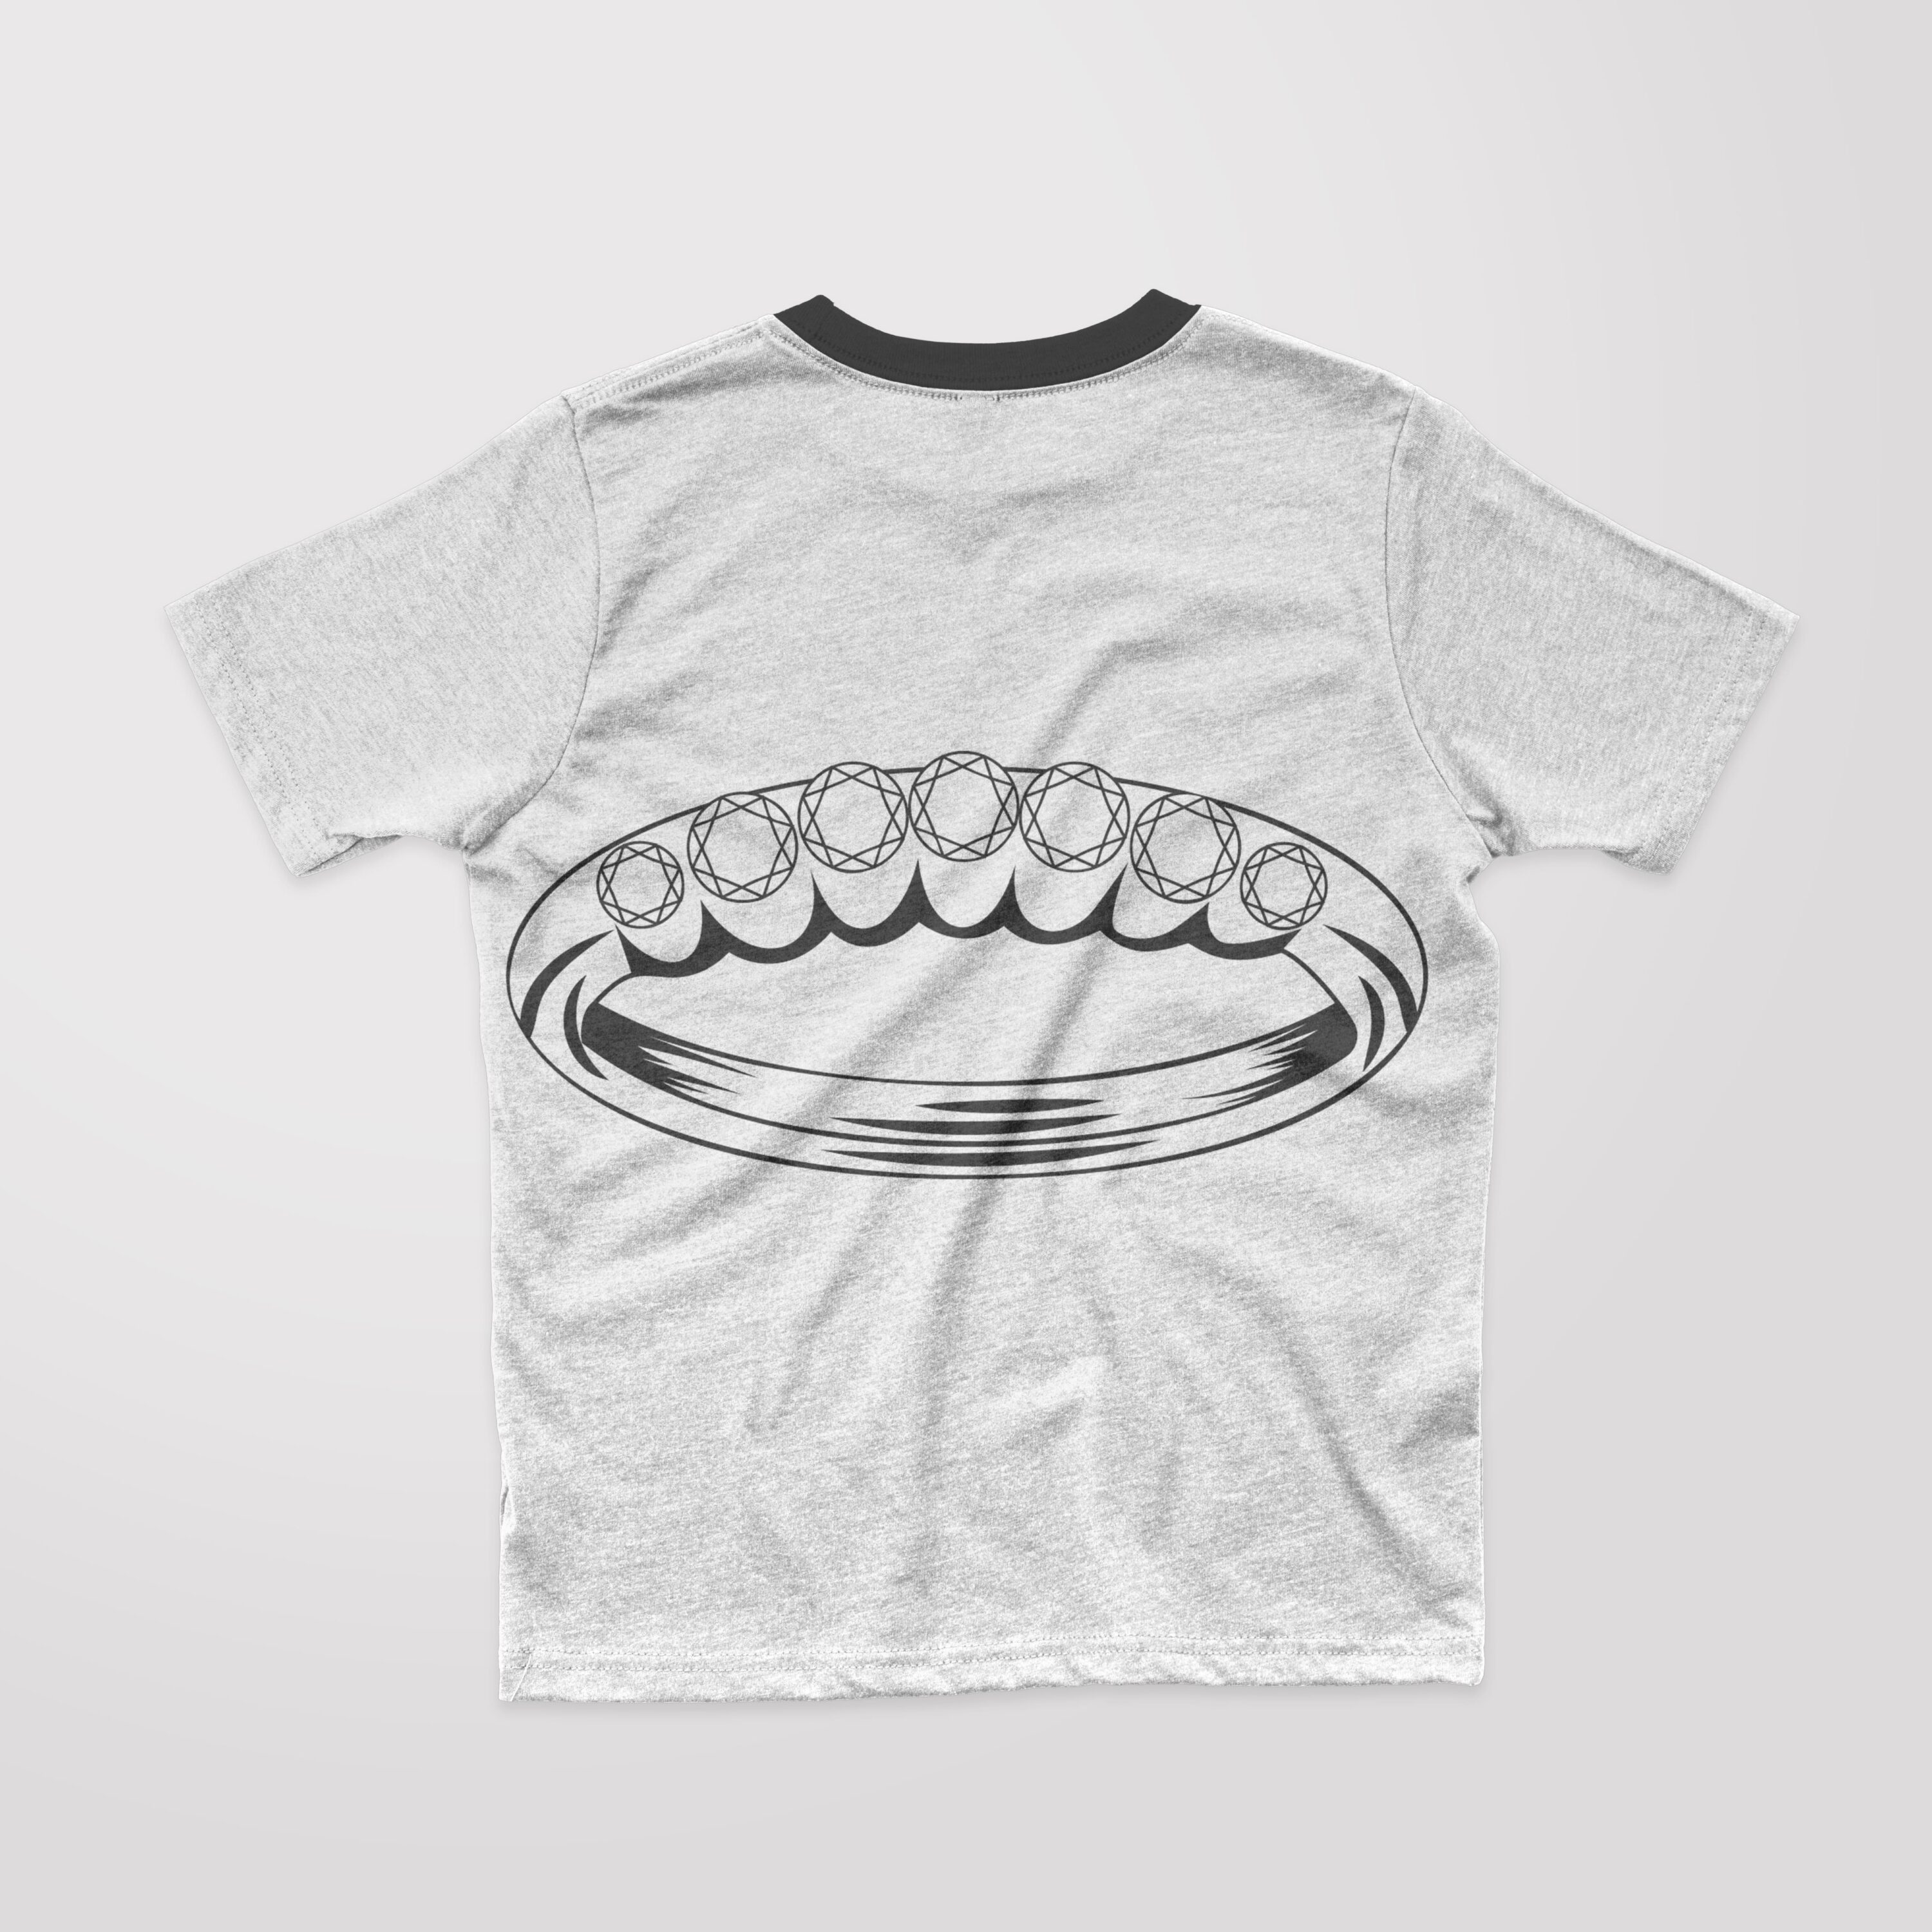 Image of a T-shirt with a gorgeous outline diamond ring print.